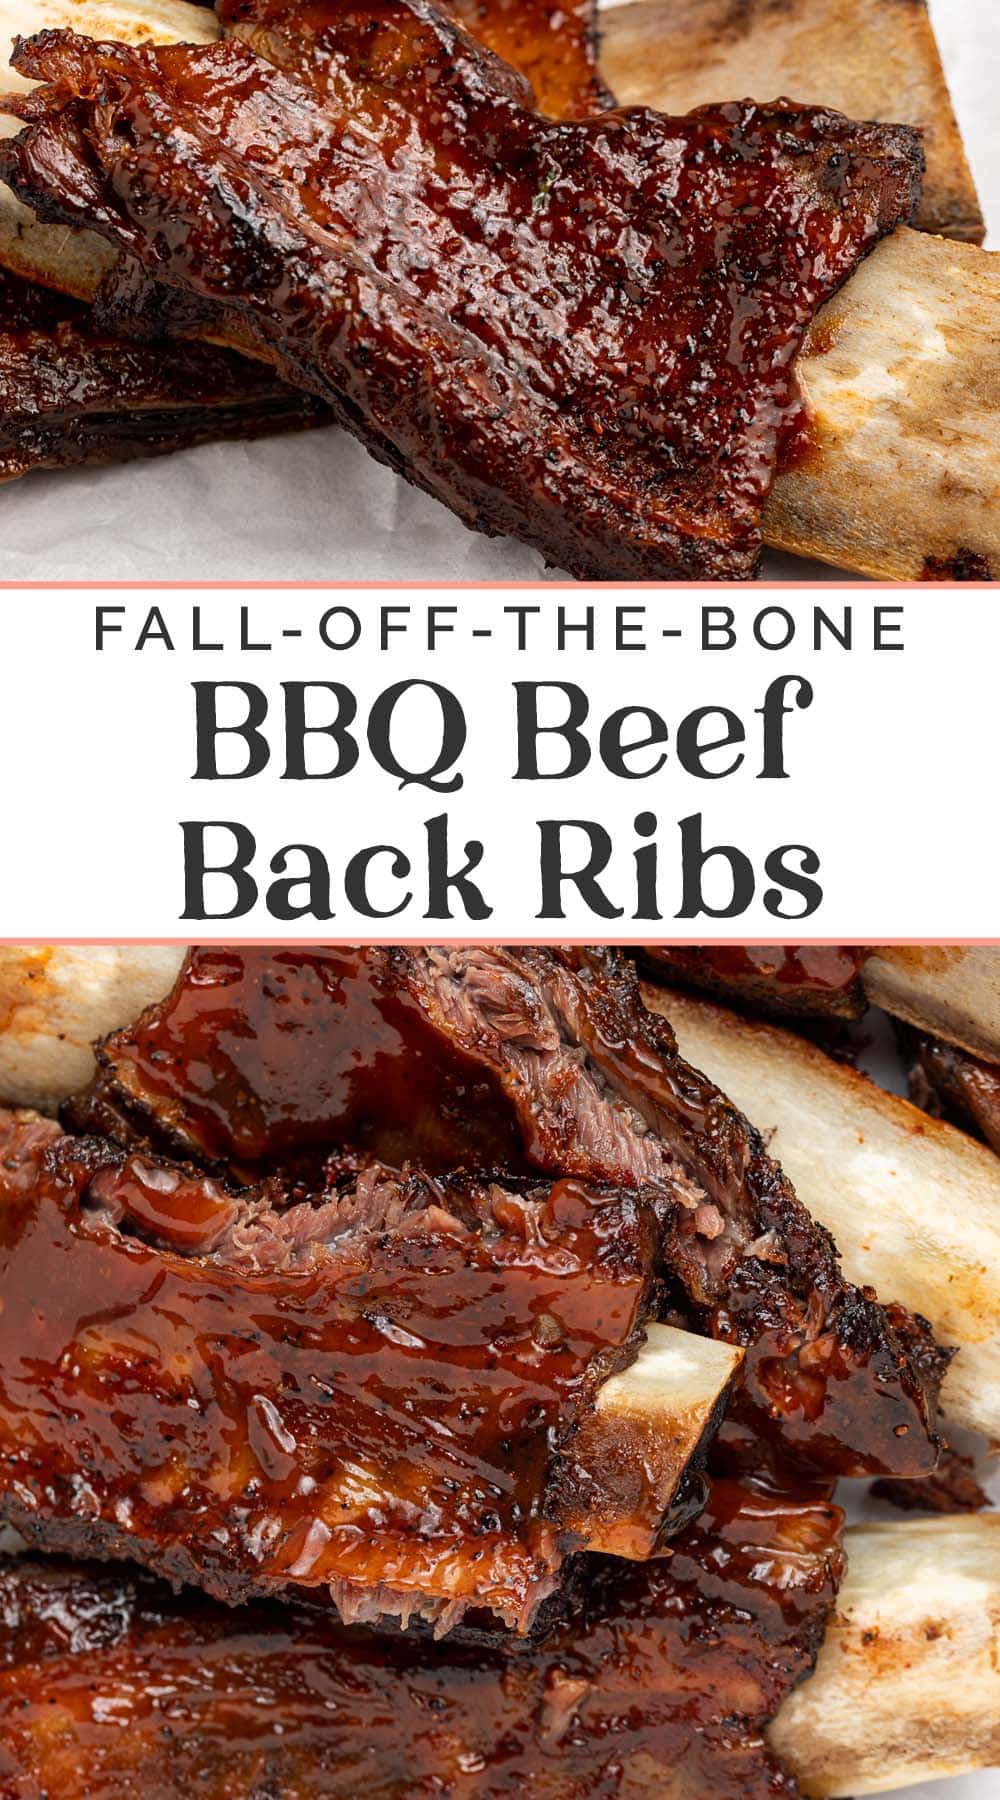 Pin graphic for beef back ribs.